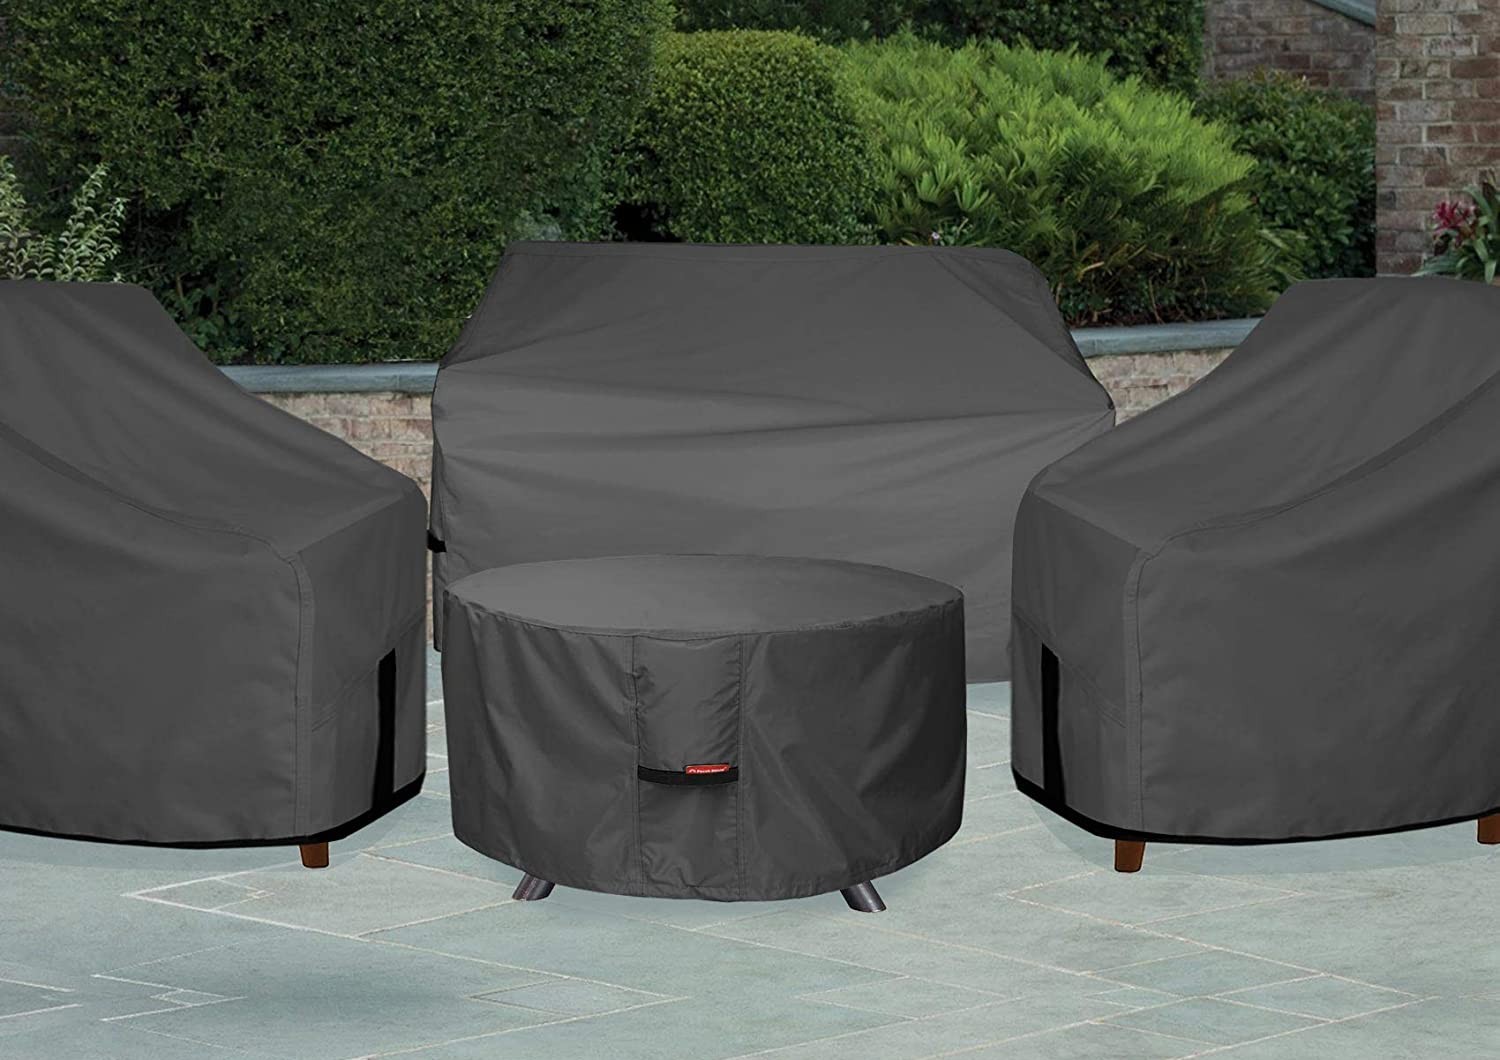 The Best Fire Pit Covers Options